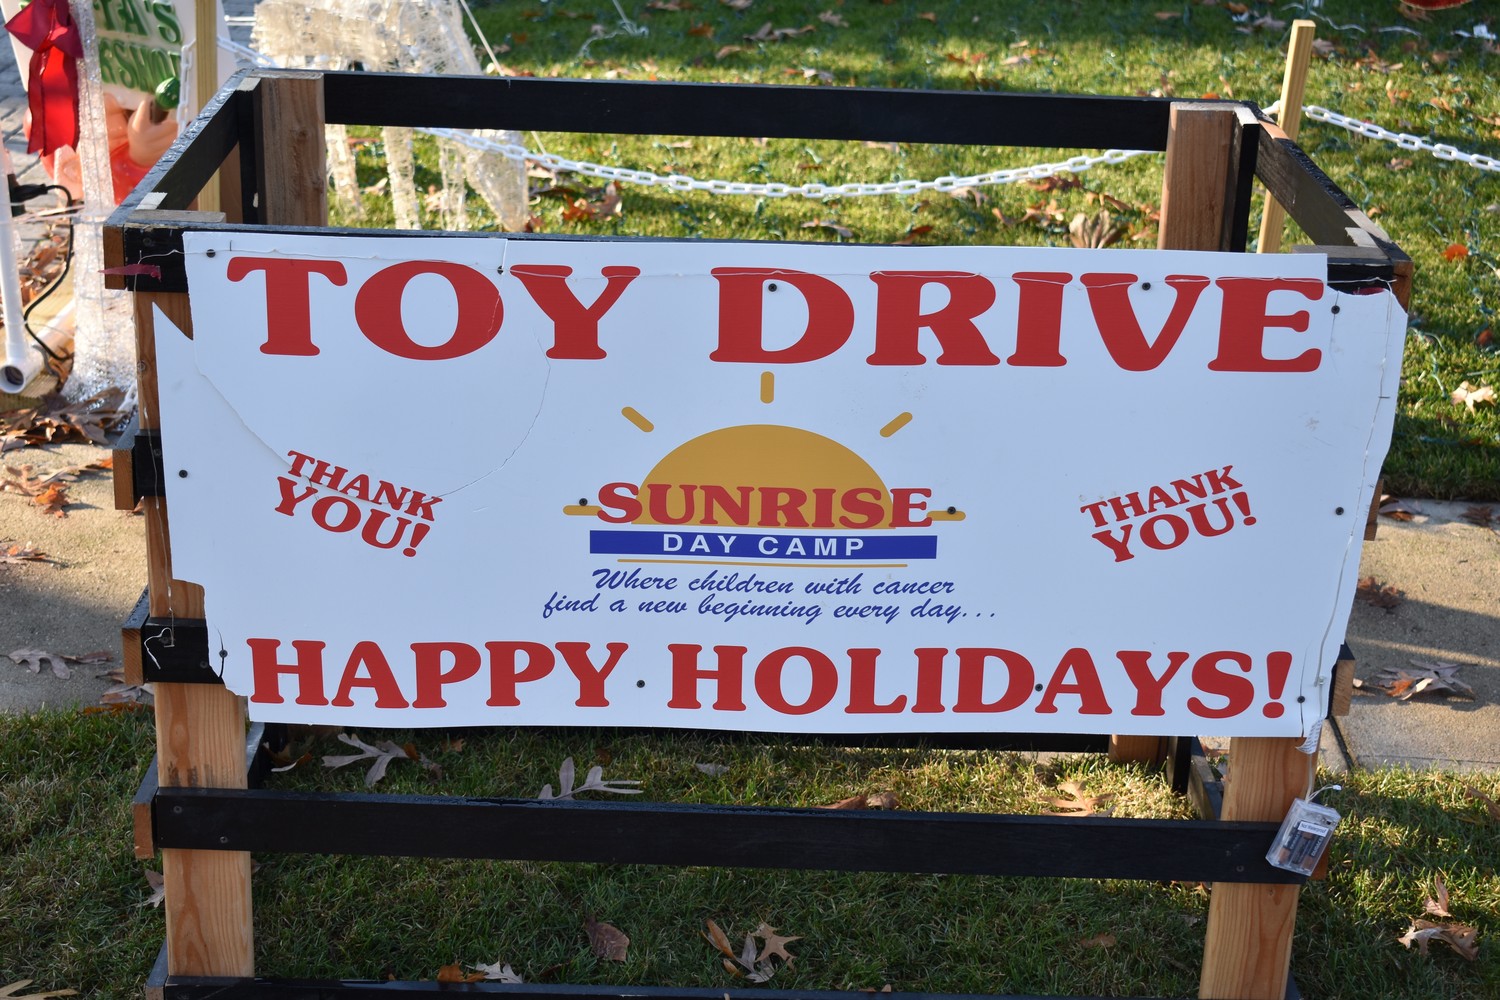 Residents are encouraged to bring new, unwrapped gifts to the curbside bin at 140 Cedar Ave. in Rockville Centre. They will be donated to children at Sunrise Day Camp.